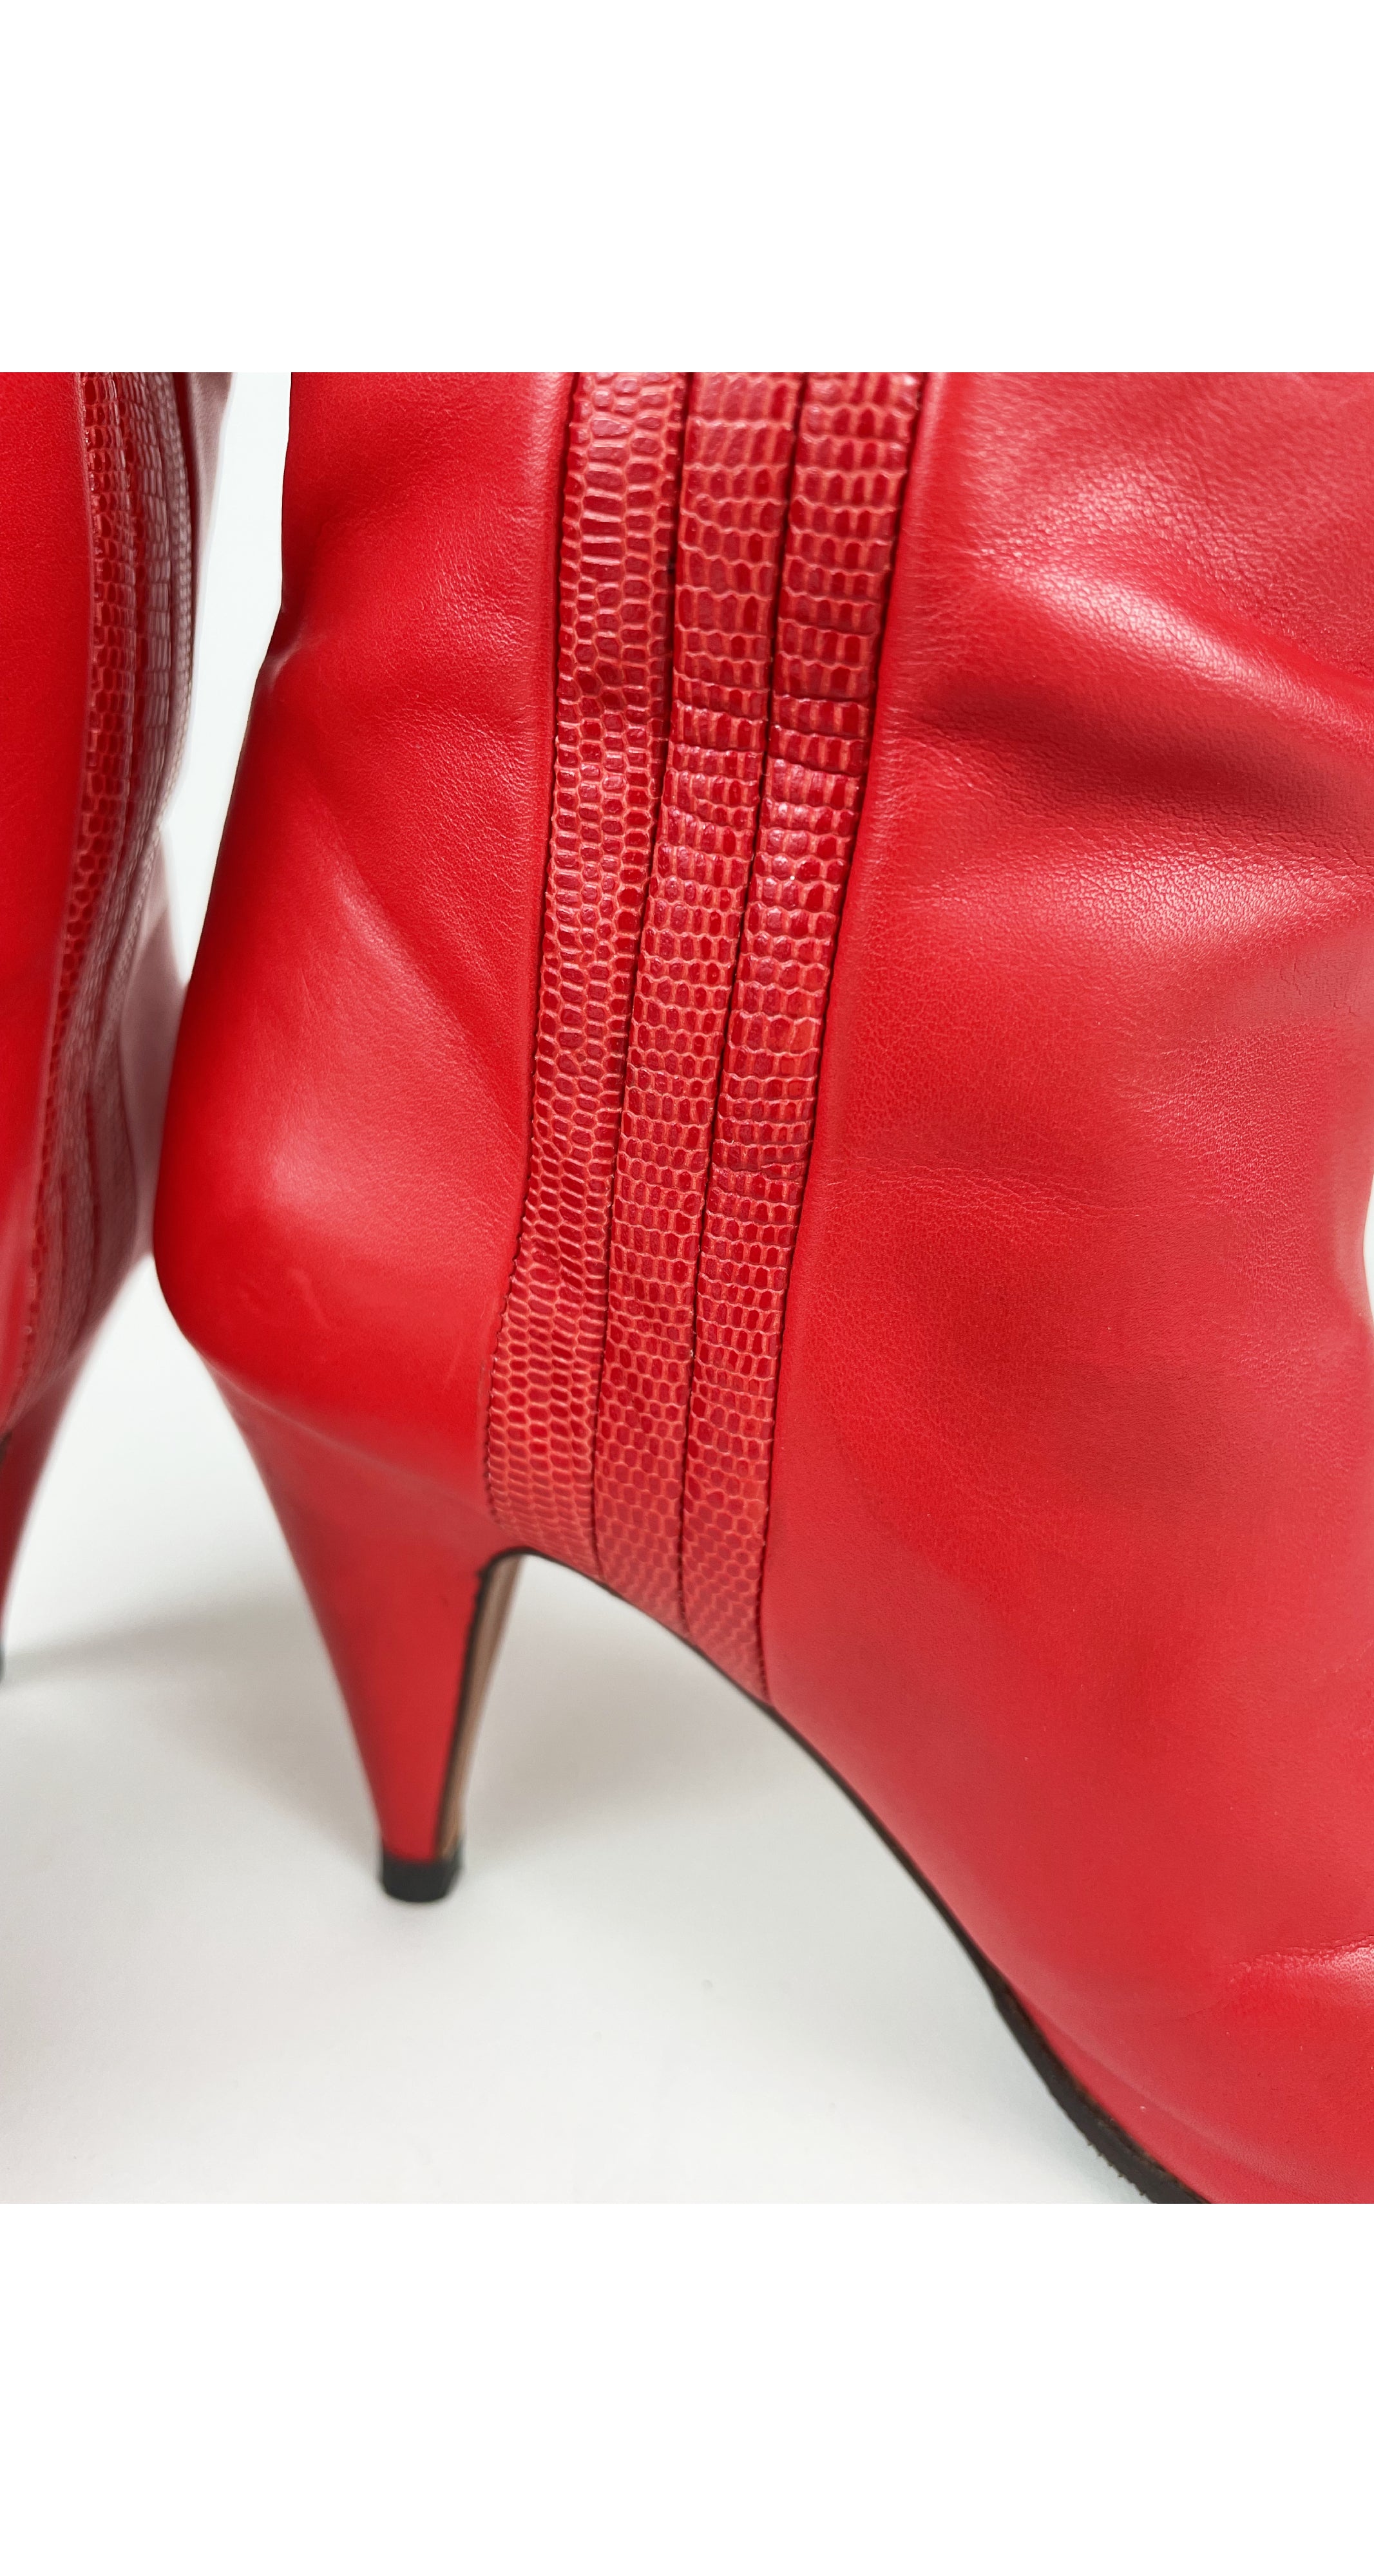 1980s Red Leather Lizard Skin High Heel Boots